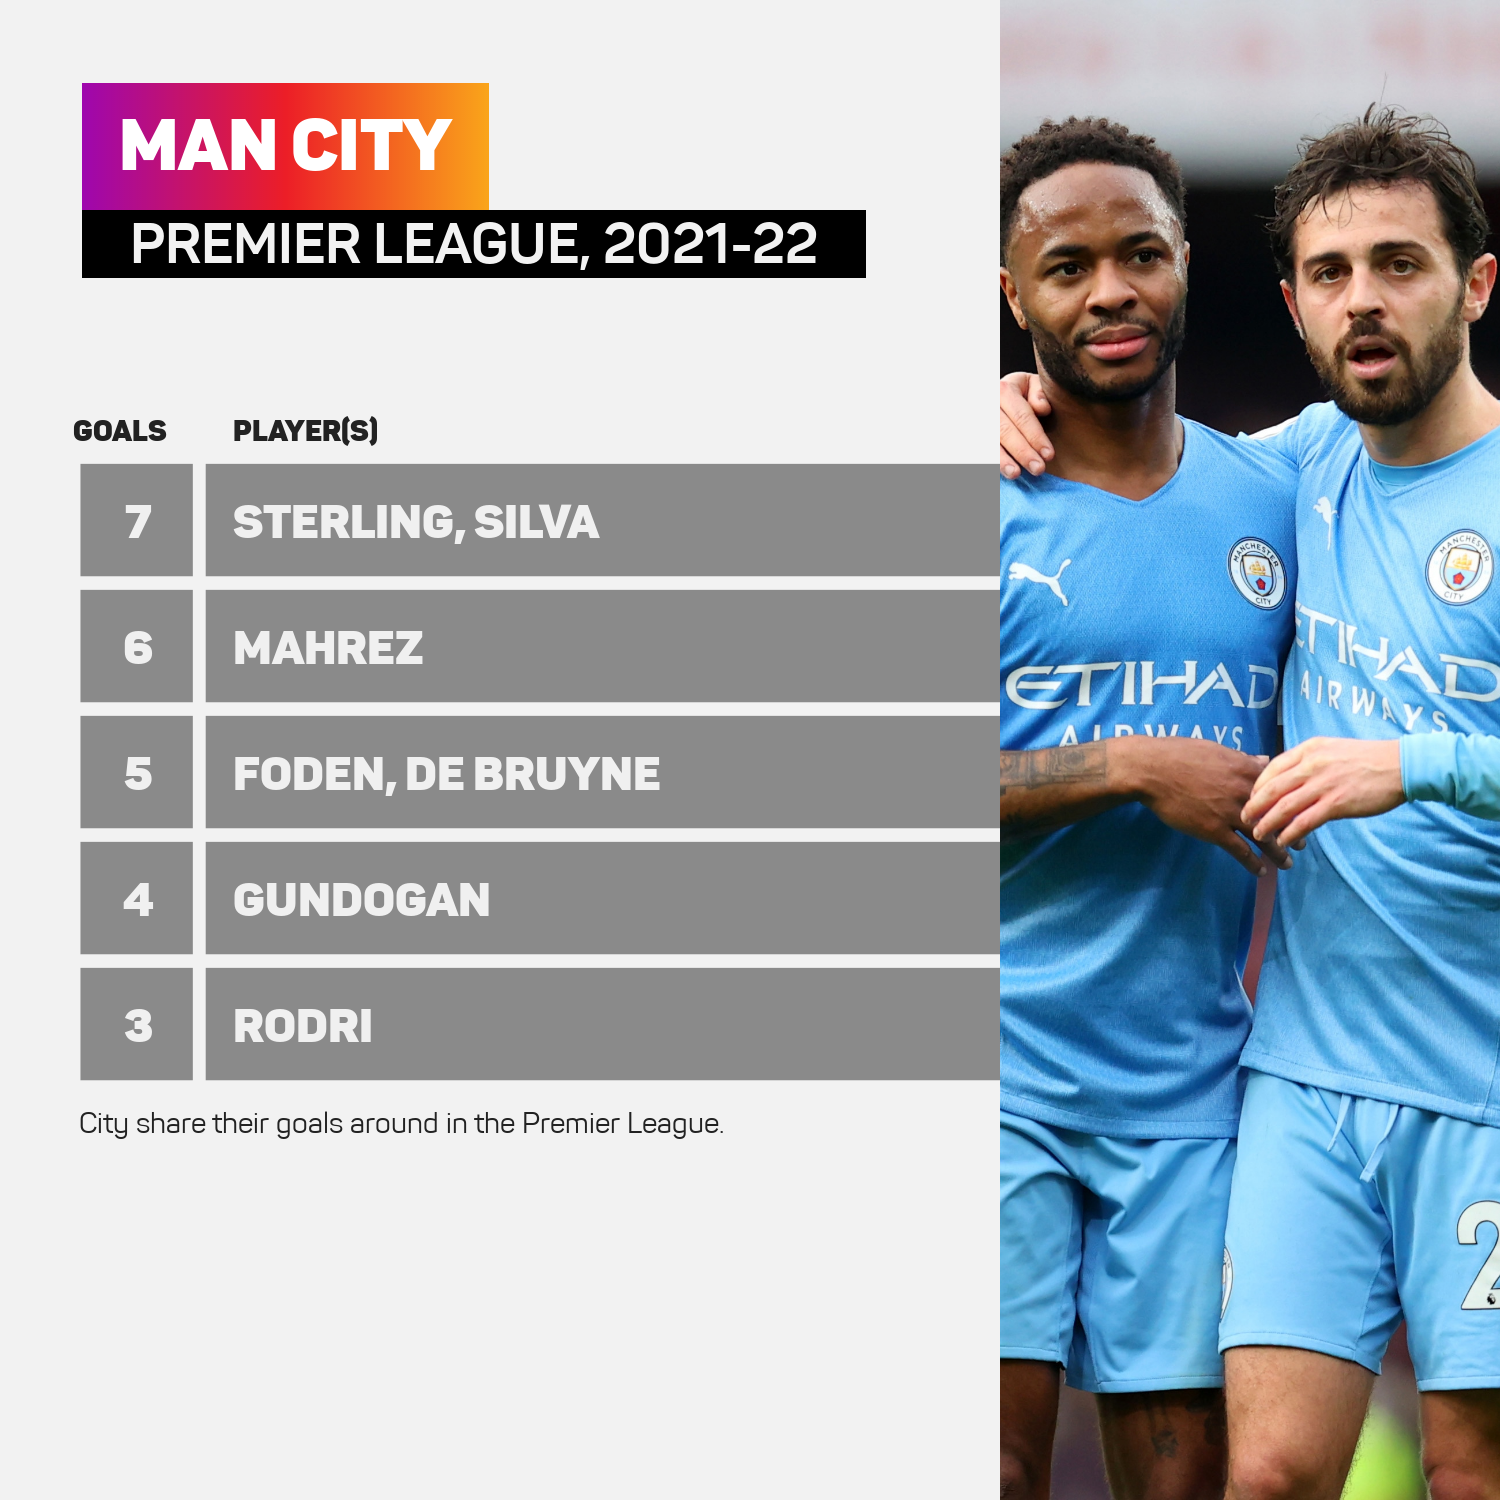 Man City do not have an out and out goalscorer, but do they really need one?